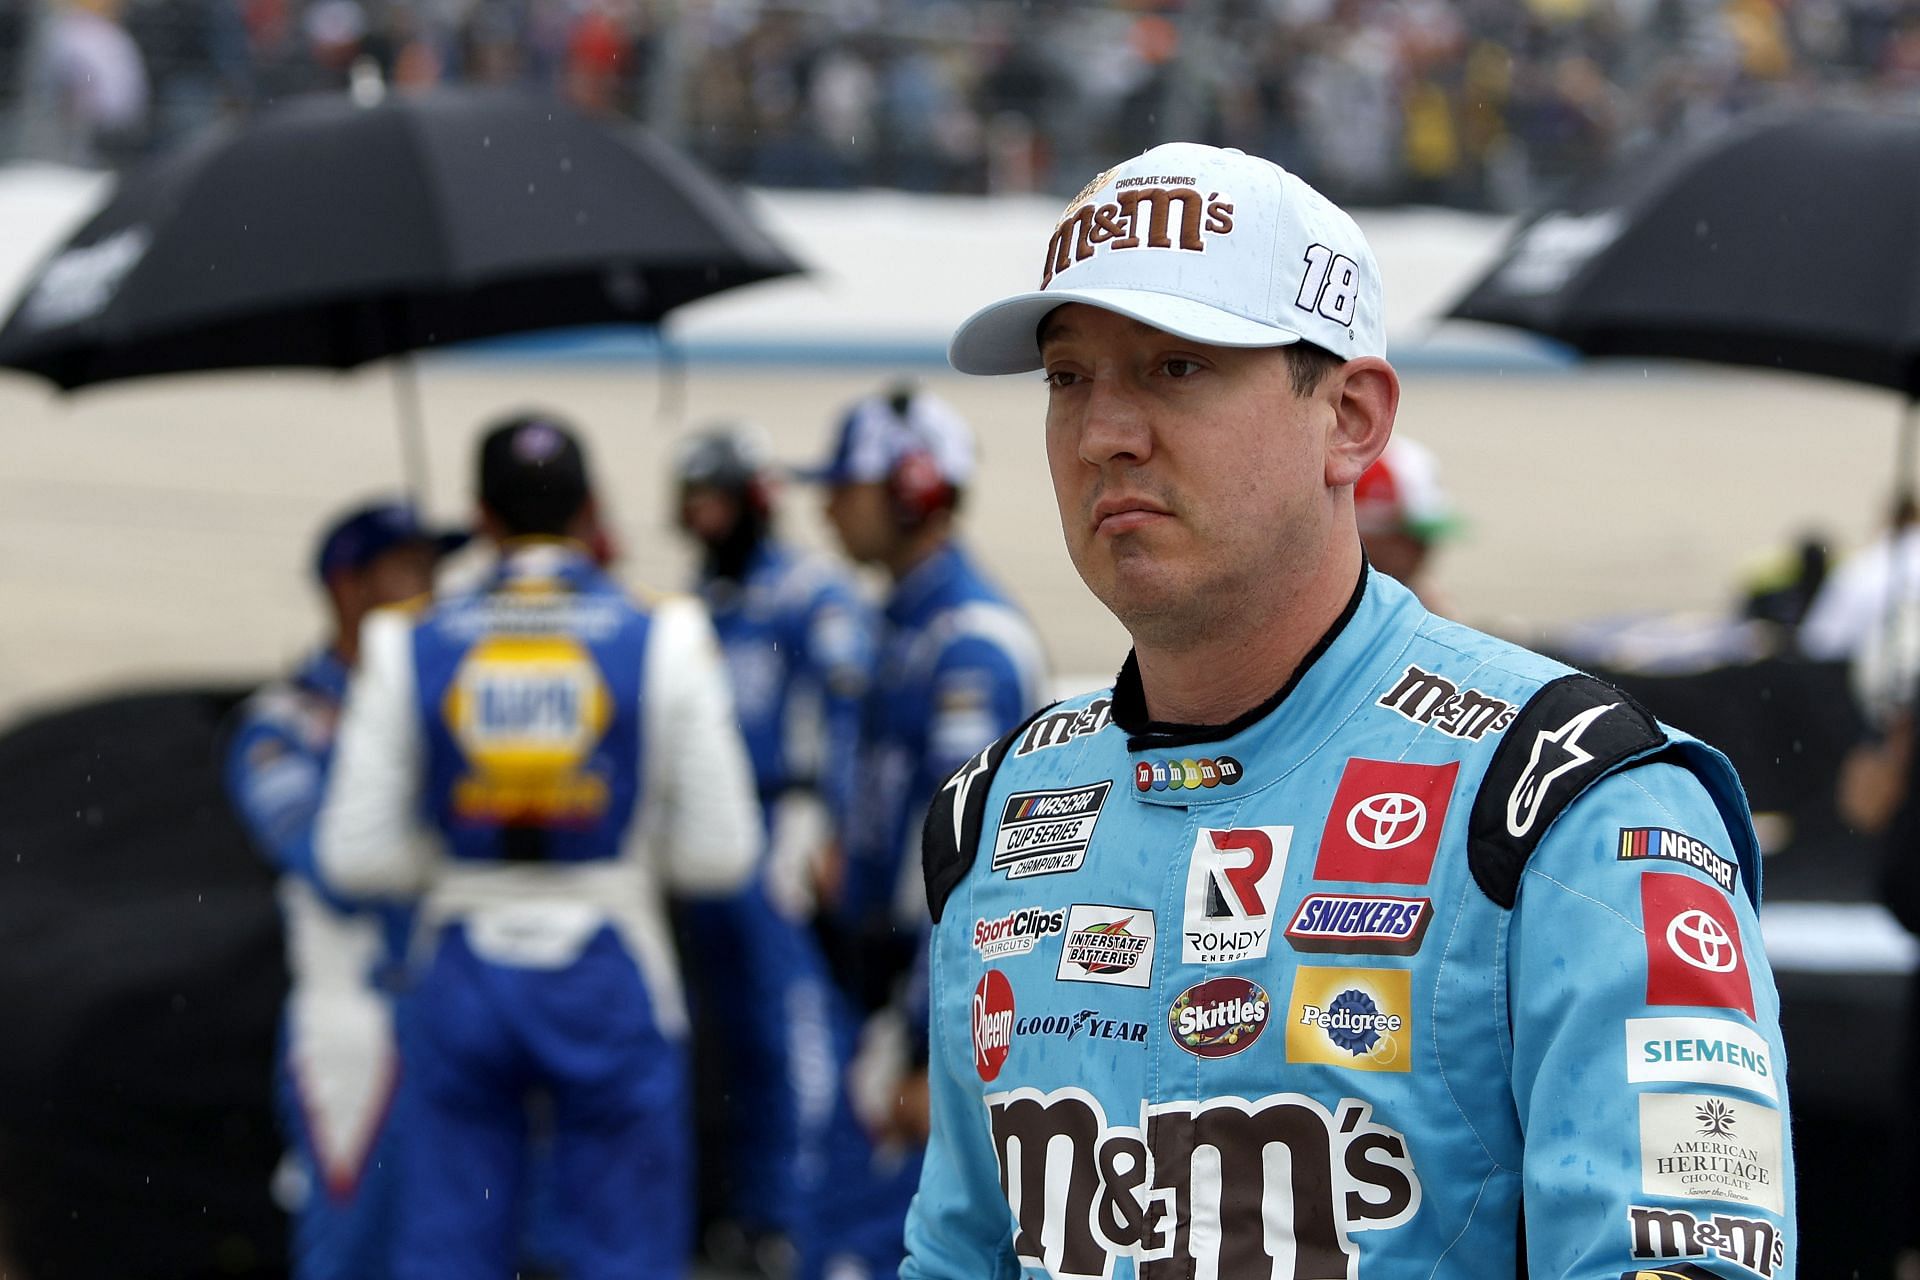 Kyle Busch walks the grid during a rain delay in the NASCAR Cup Series DuraMAX Drydene 400 presented by RelaDyne at Dover Motor Speedway.